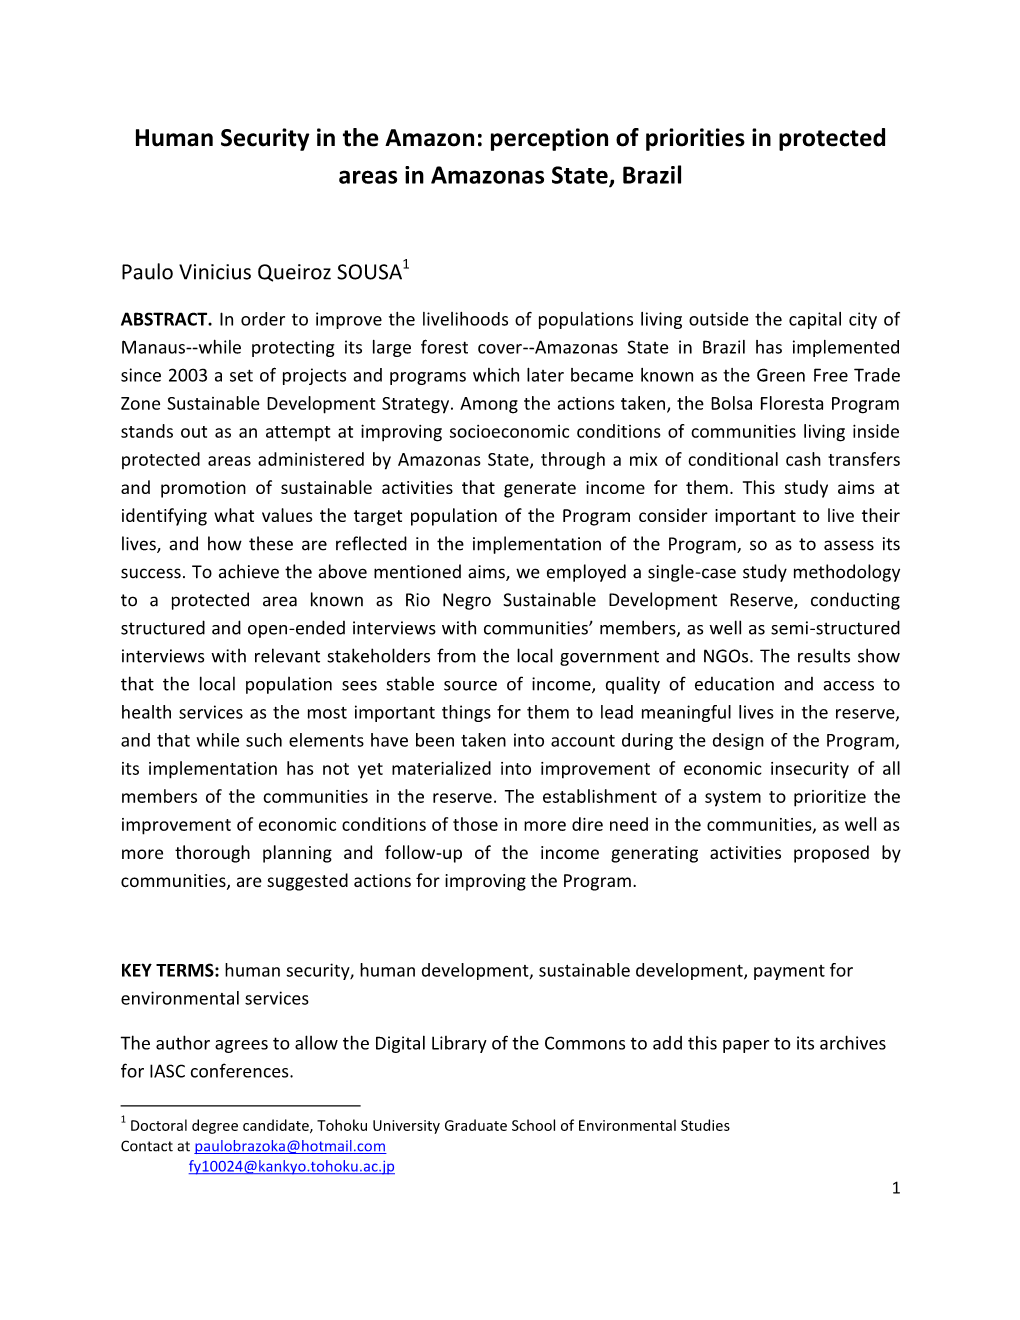 Perception of Priorities in Protected Areas in Amazonas State, Brazil